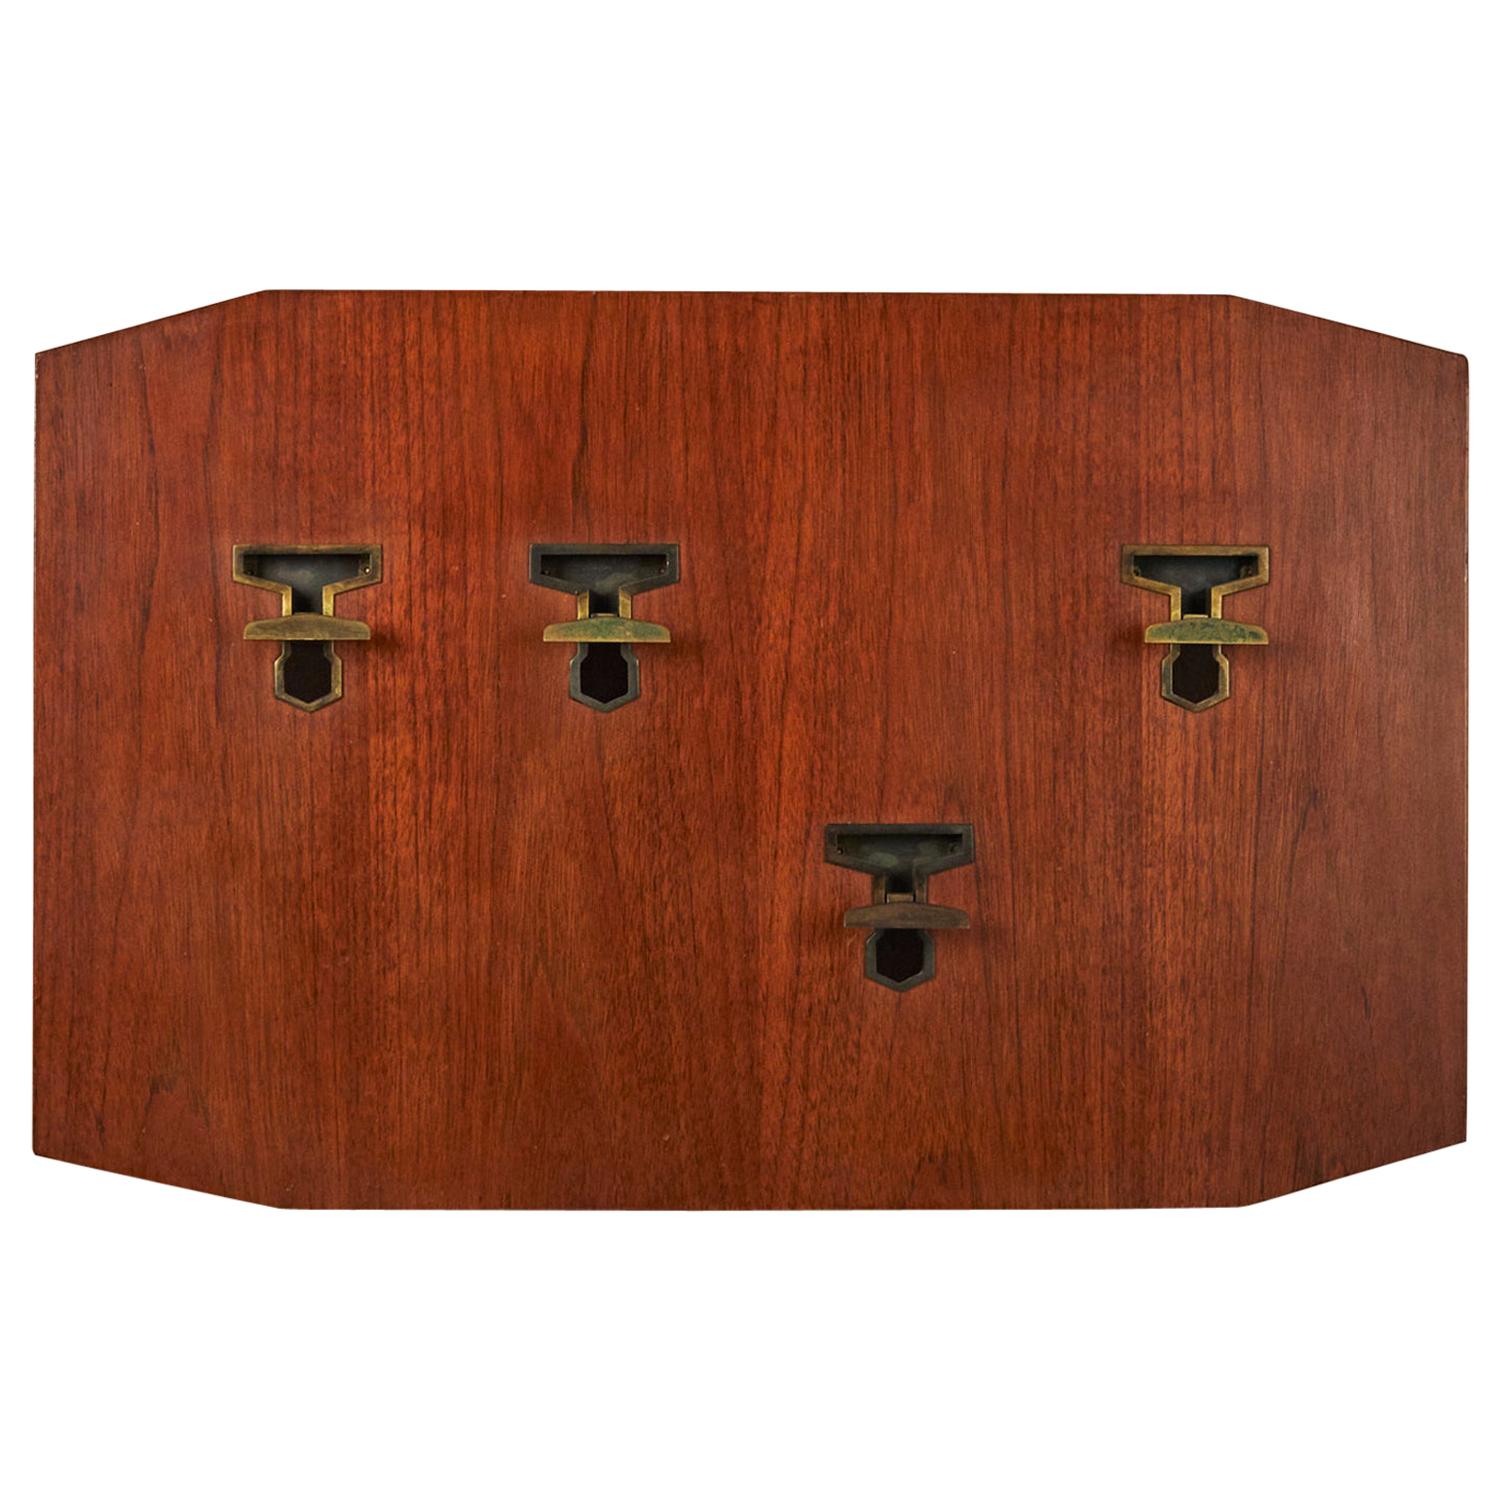 Teak Wood and Brass Coat Rack by Melchiorre Bega from the Late 1950's For Sale